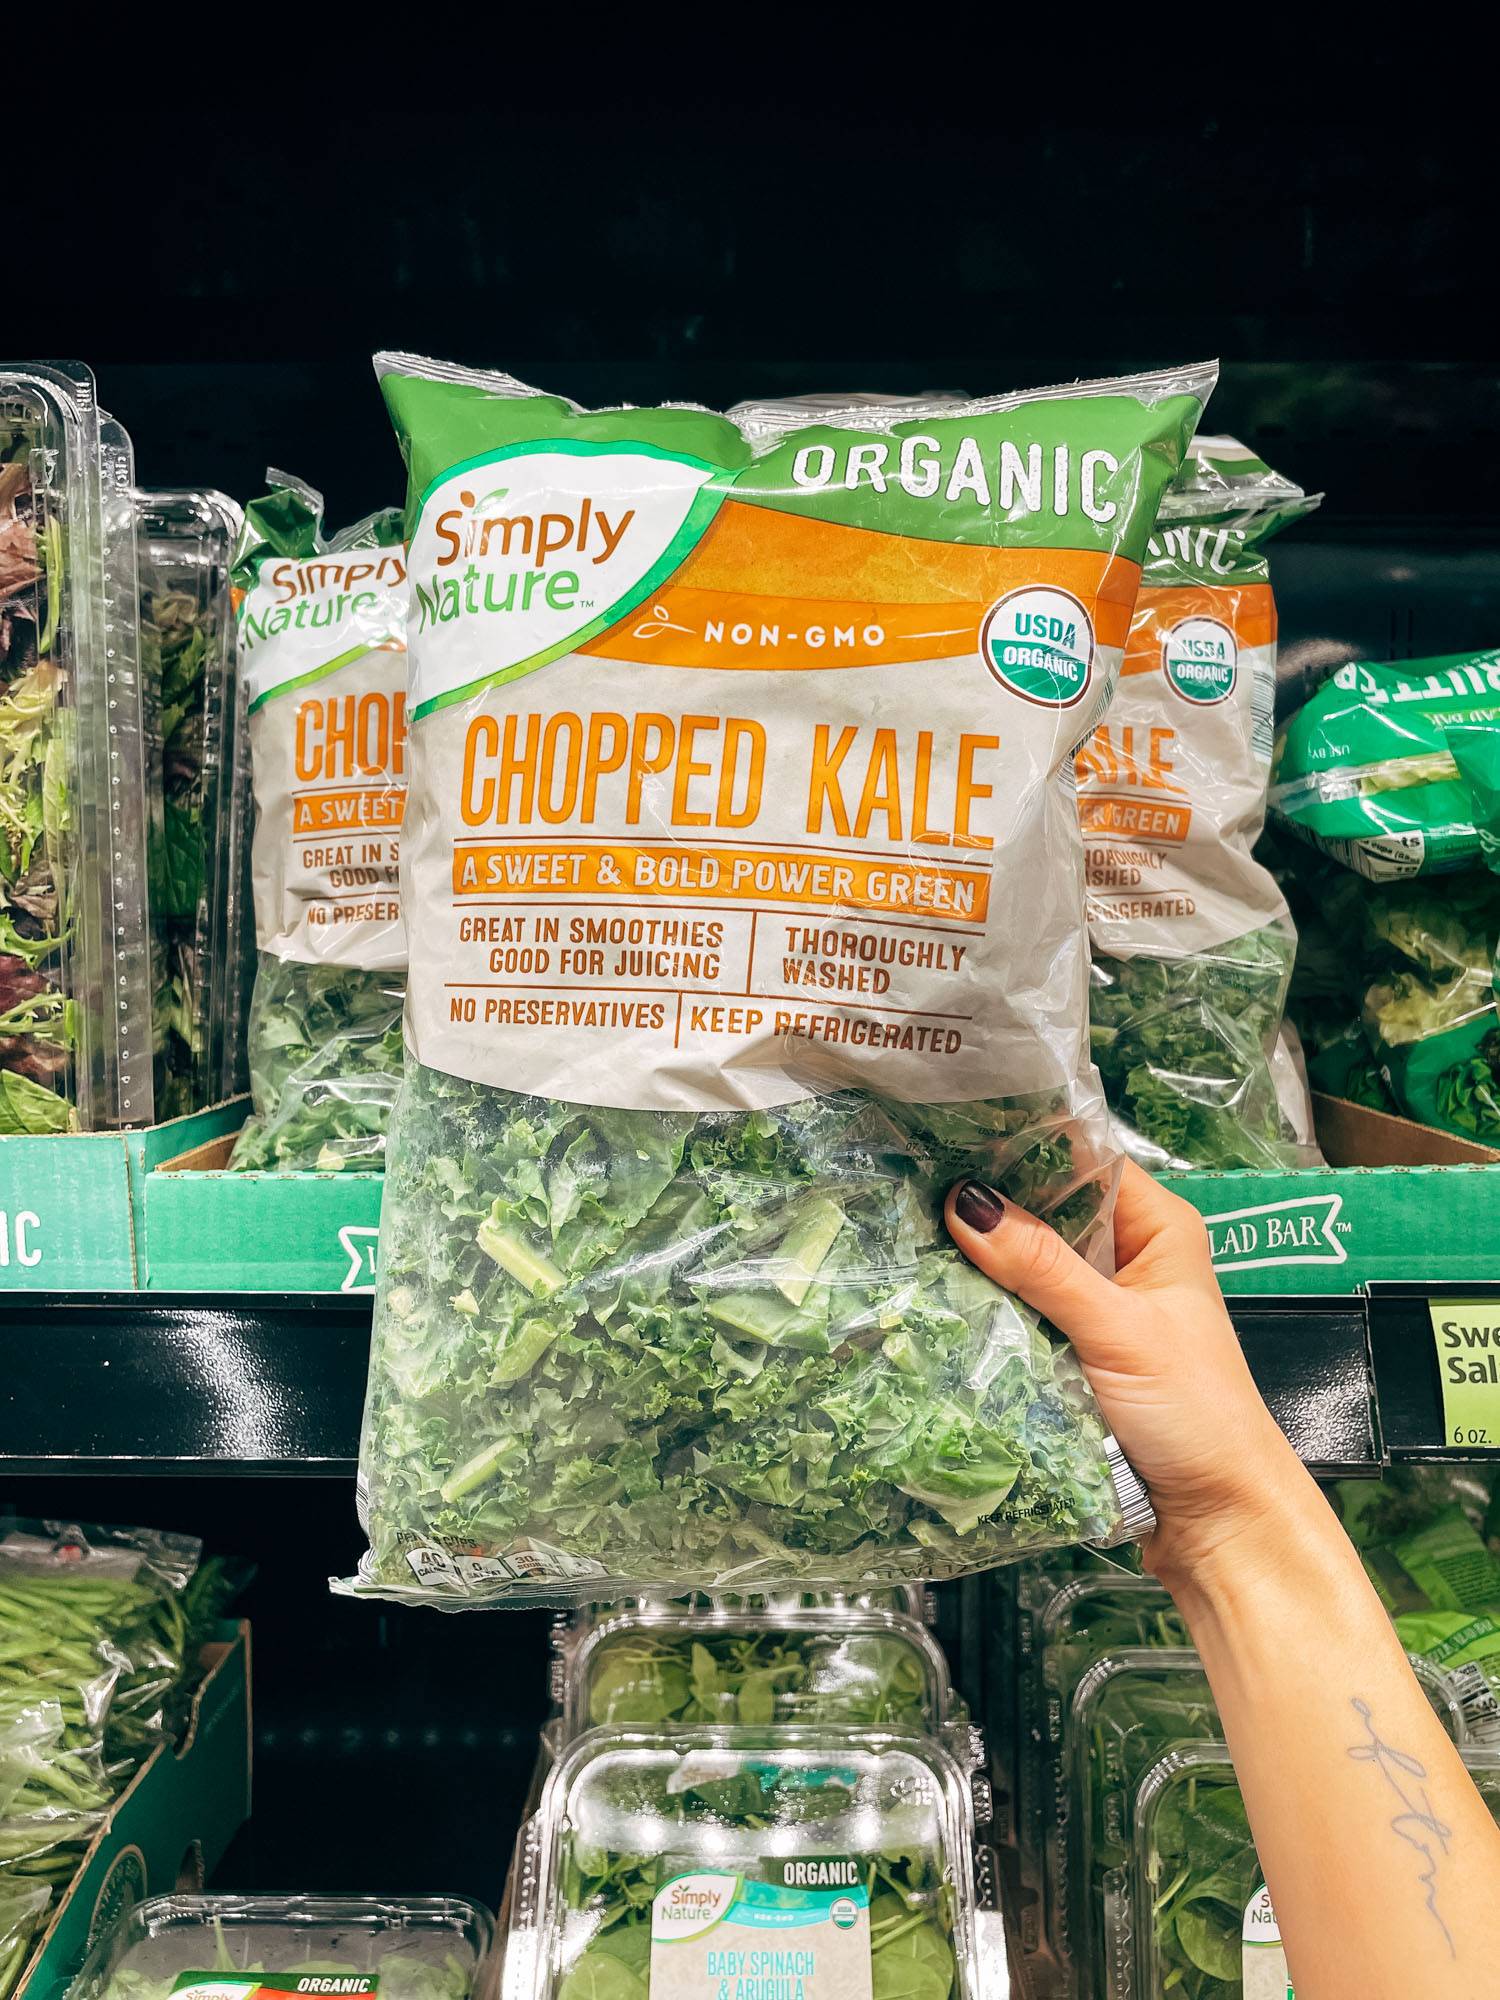 White hand holding a bag of chopped kale